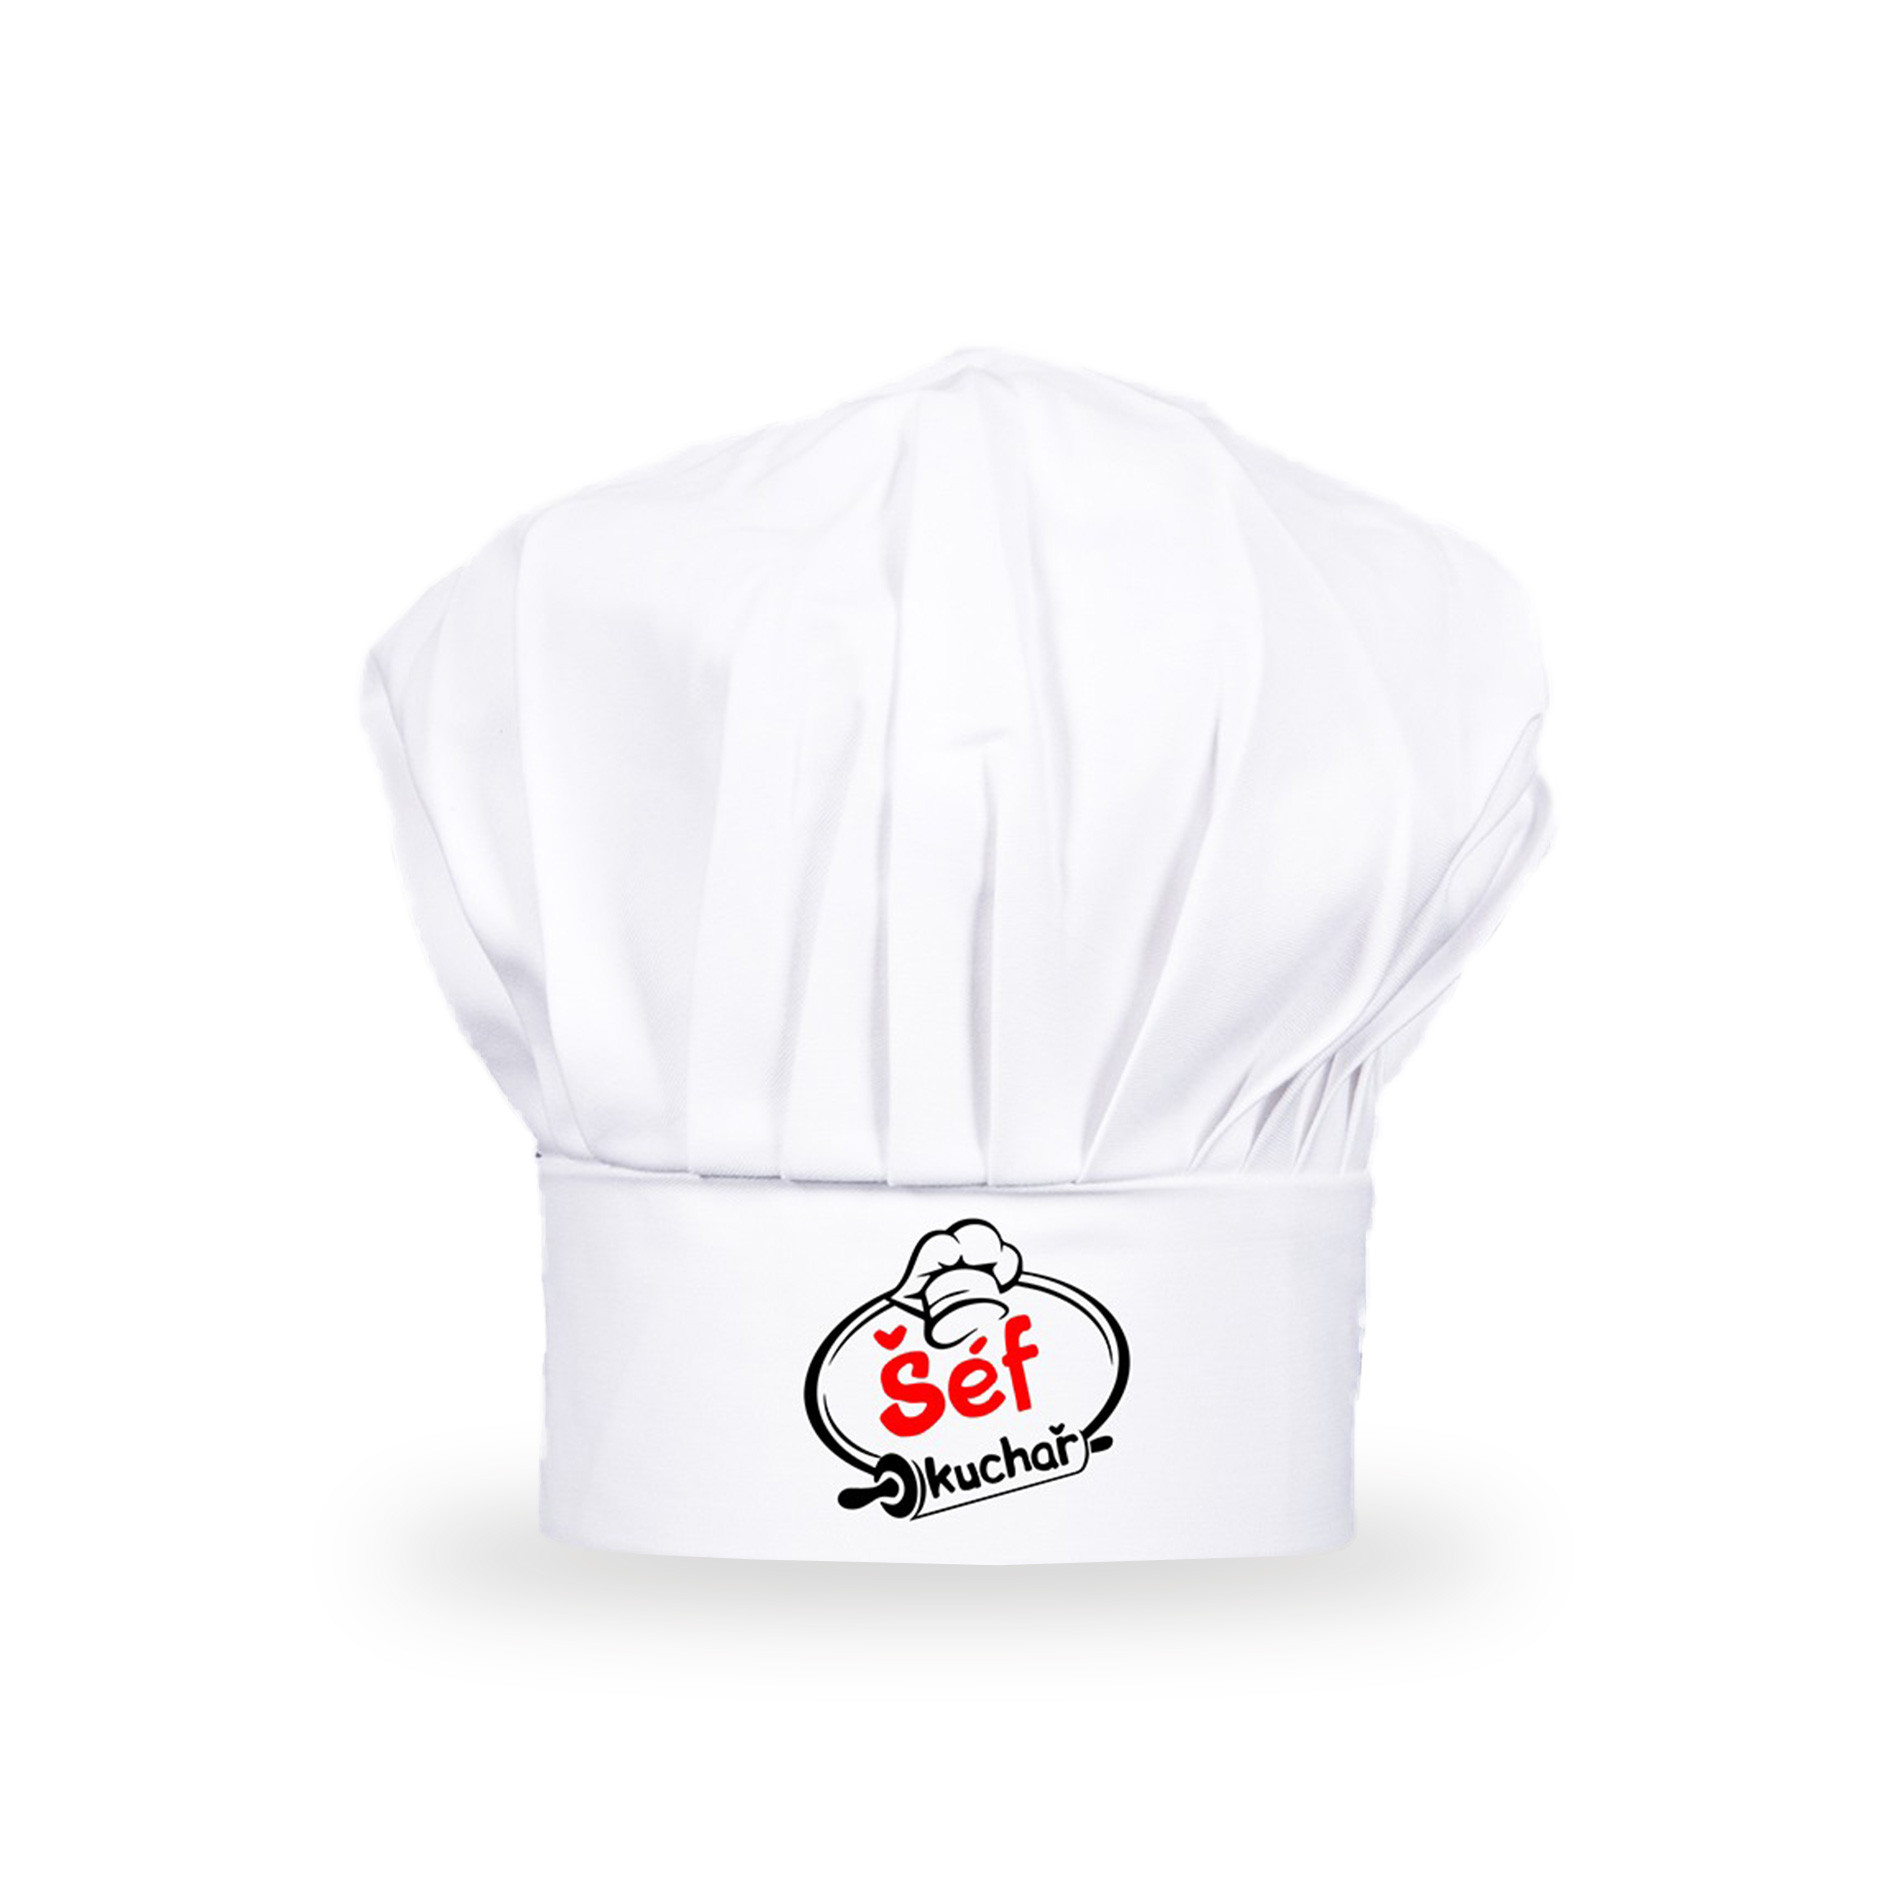 the Baby chef hat